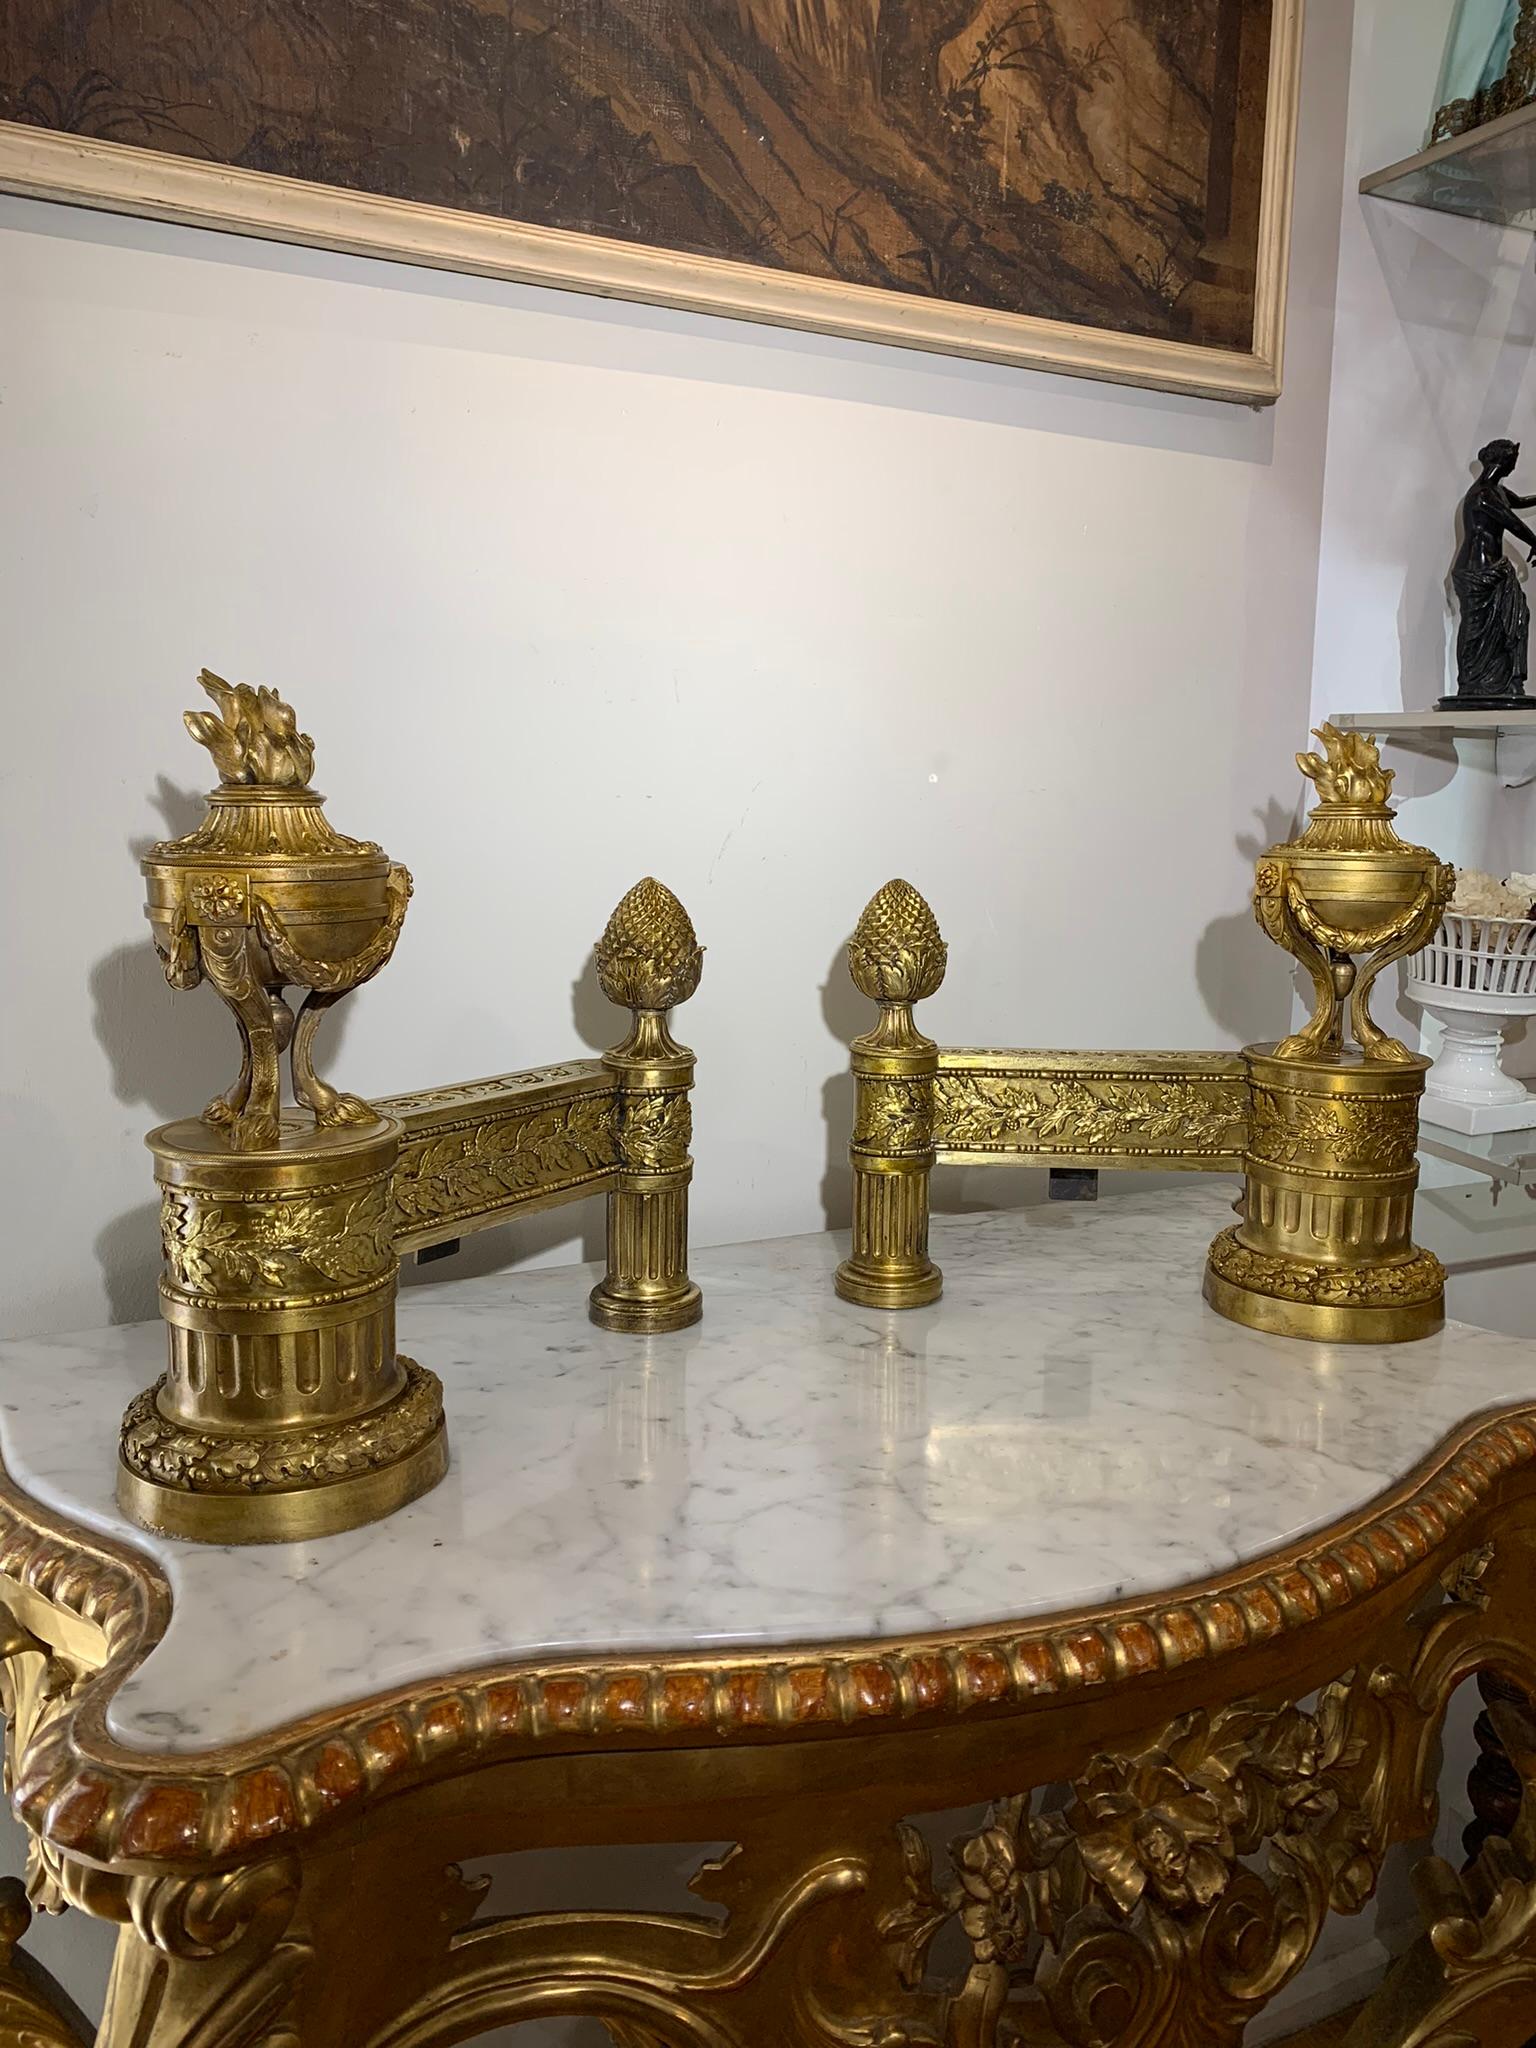 Neoclassical Revival LATE 18th CENTURY PAIR OF NEOCLASSICAL GILDED BRONZE ANDIRONS For Sale